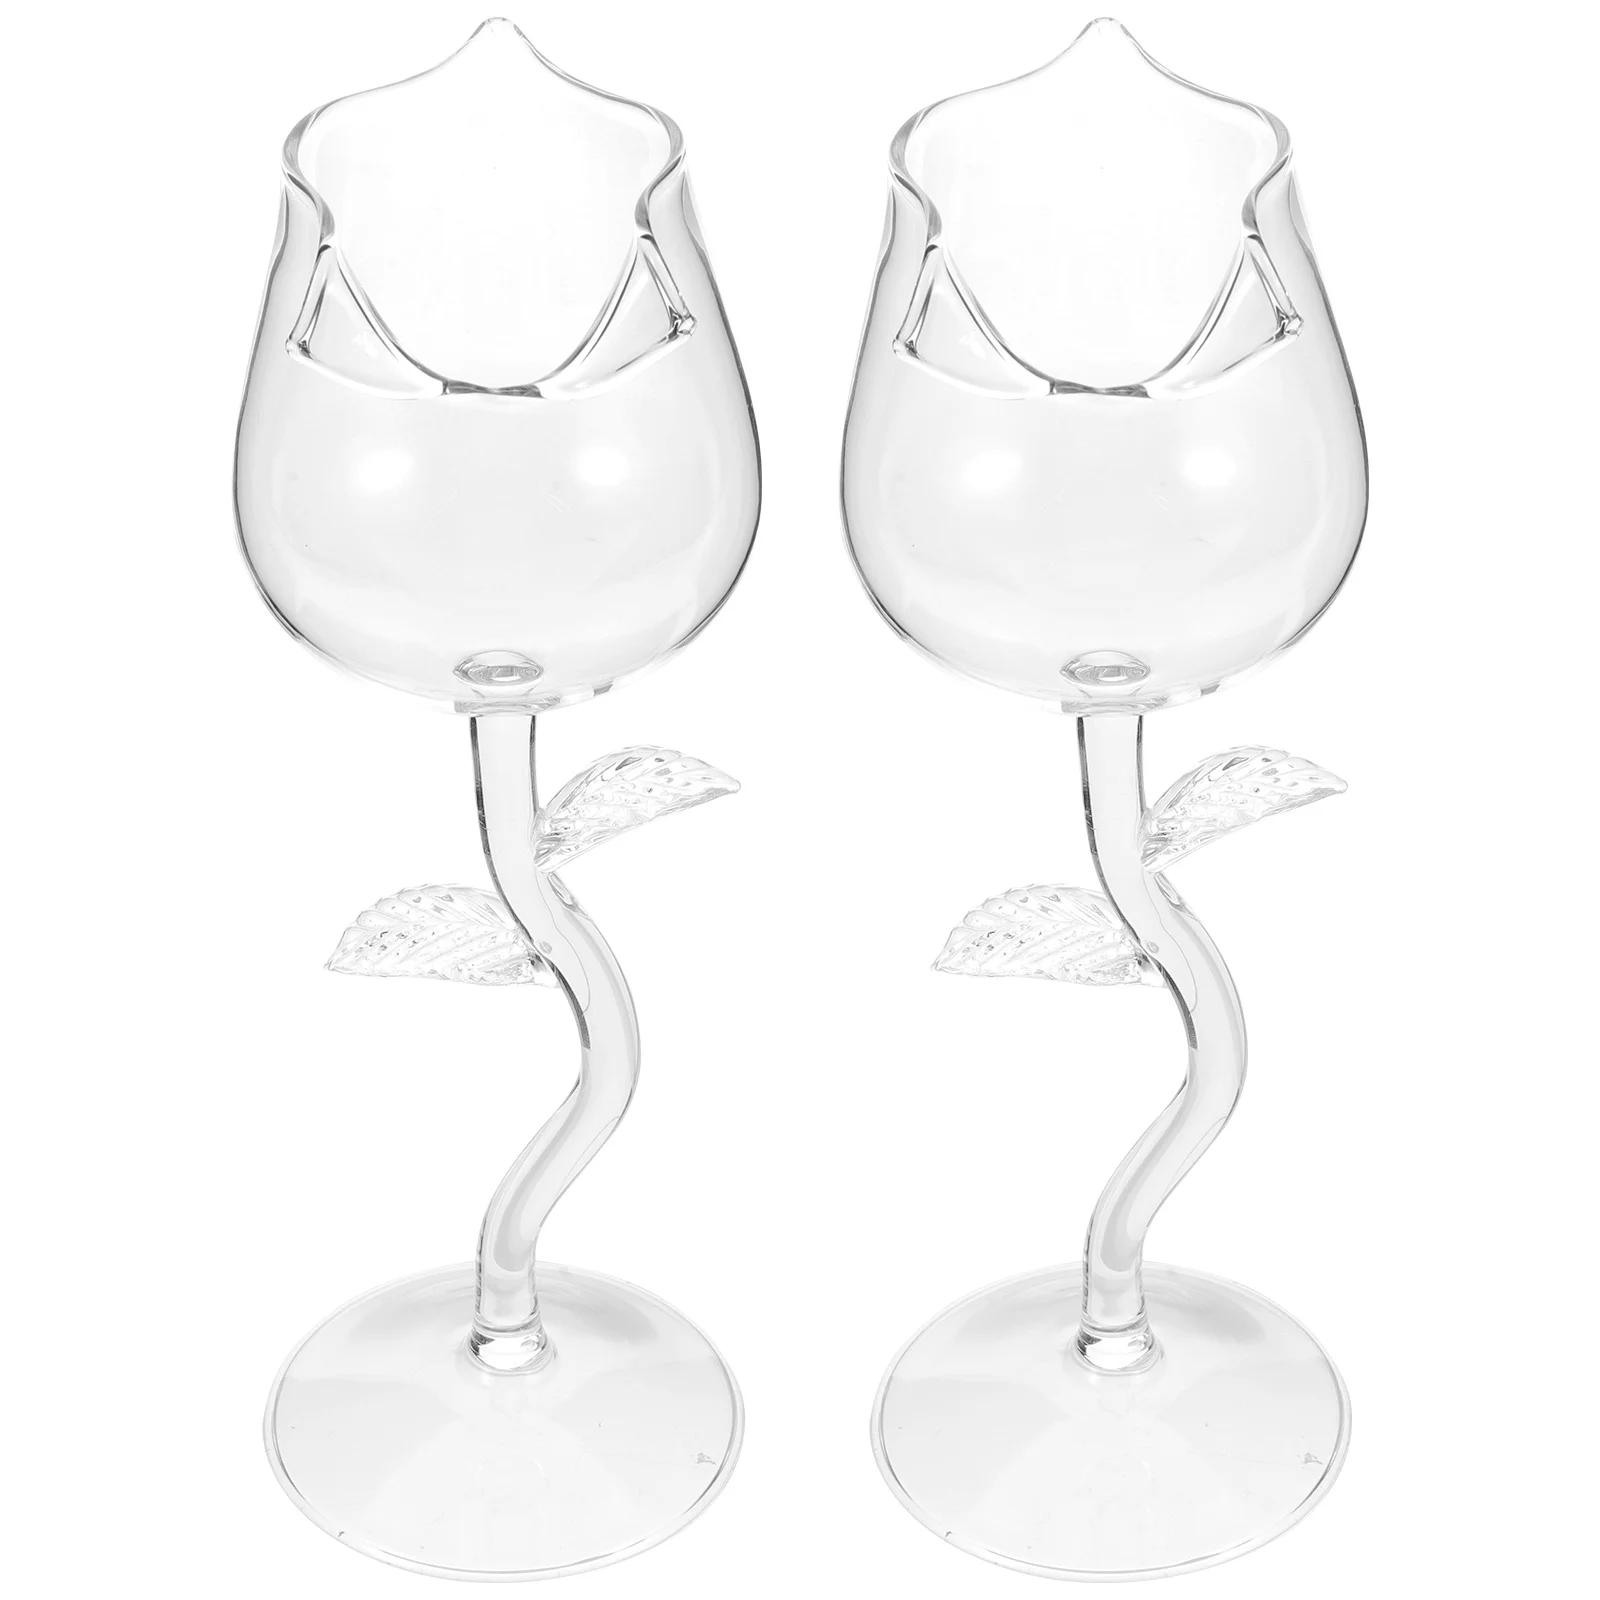 

Glasses Rose Goblet Cocktail Cup Flower Champagne Whiskey Martini Toasting Cups Tumbler Drink Decanter Red Burgundy Shaped